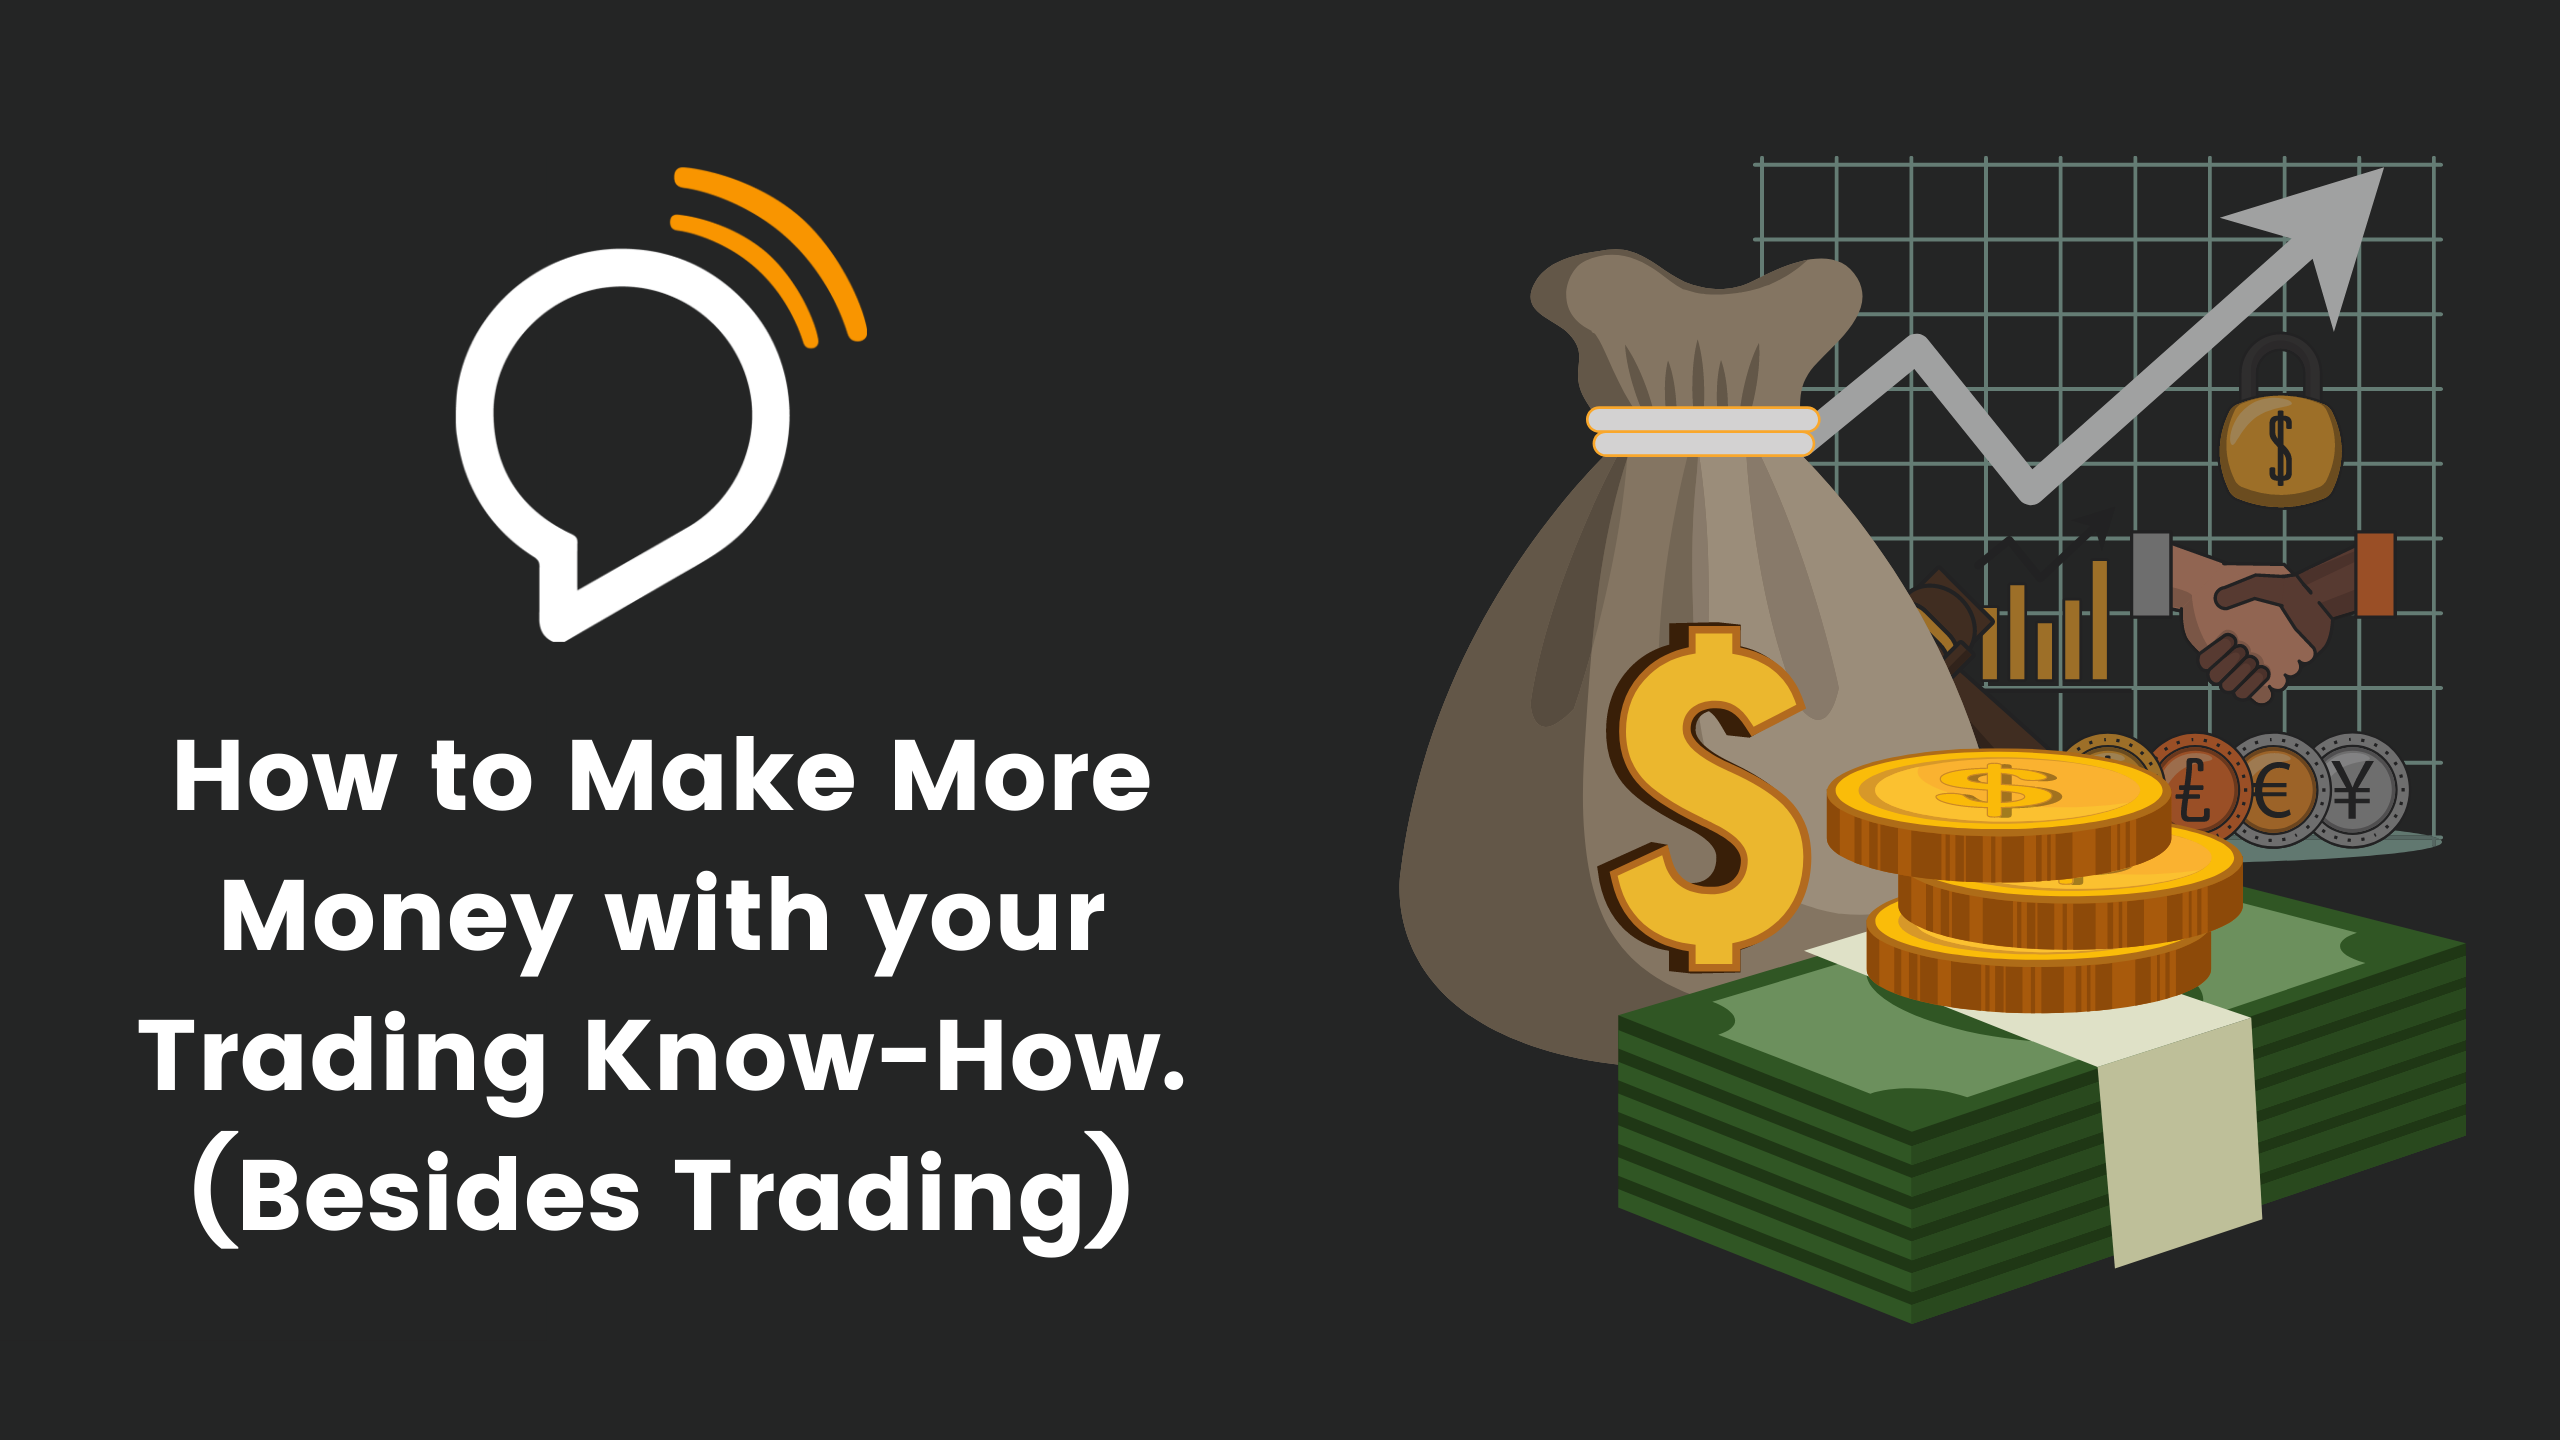 How to Make More Money with Your Trading Know-Ηow (Besides Trading)